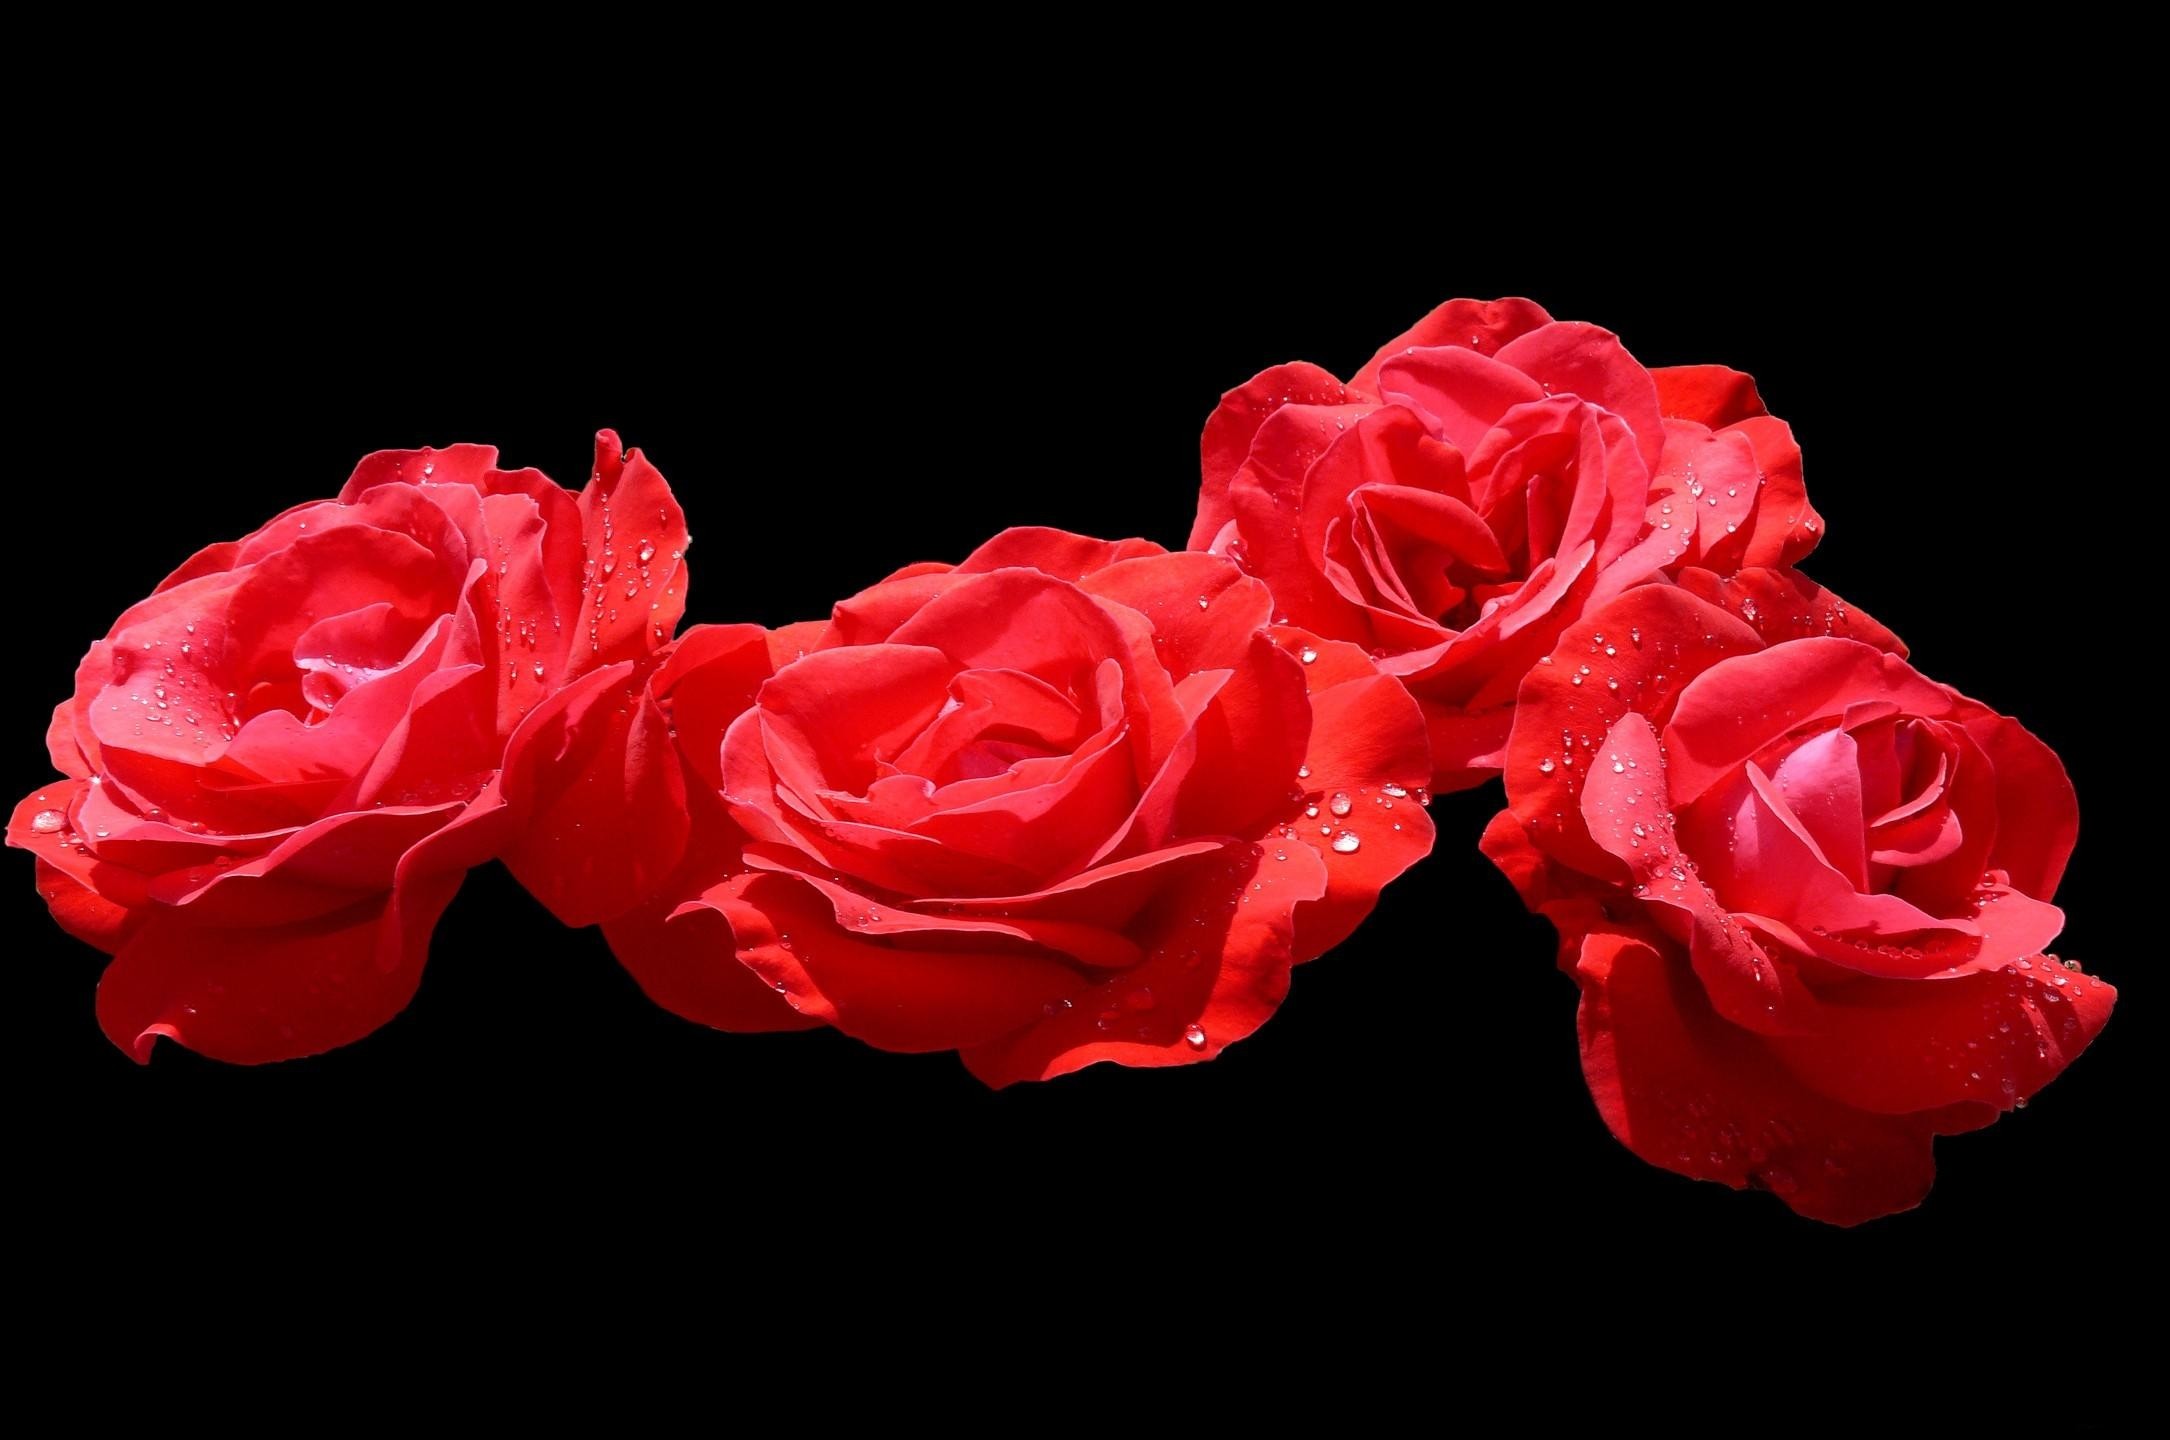 2170x1440 Wallpaper Rose, Buds, Red, Drops, Black background